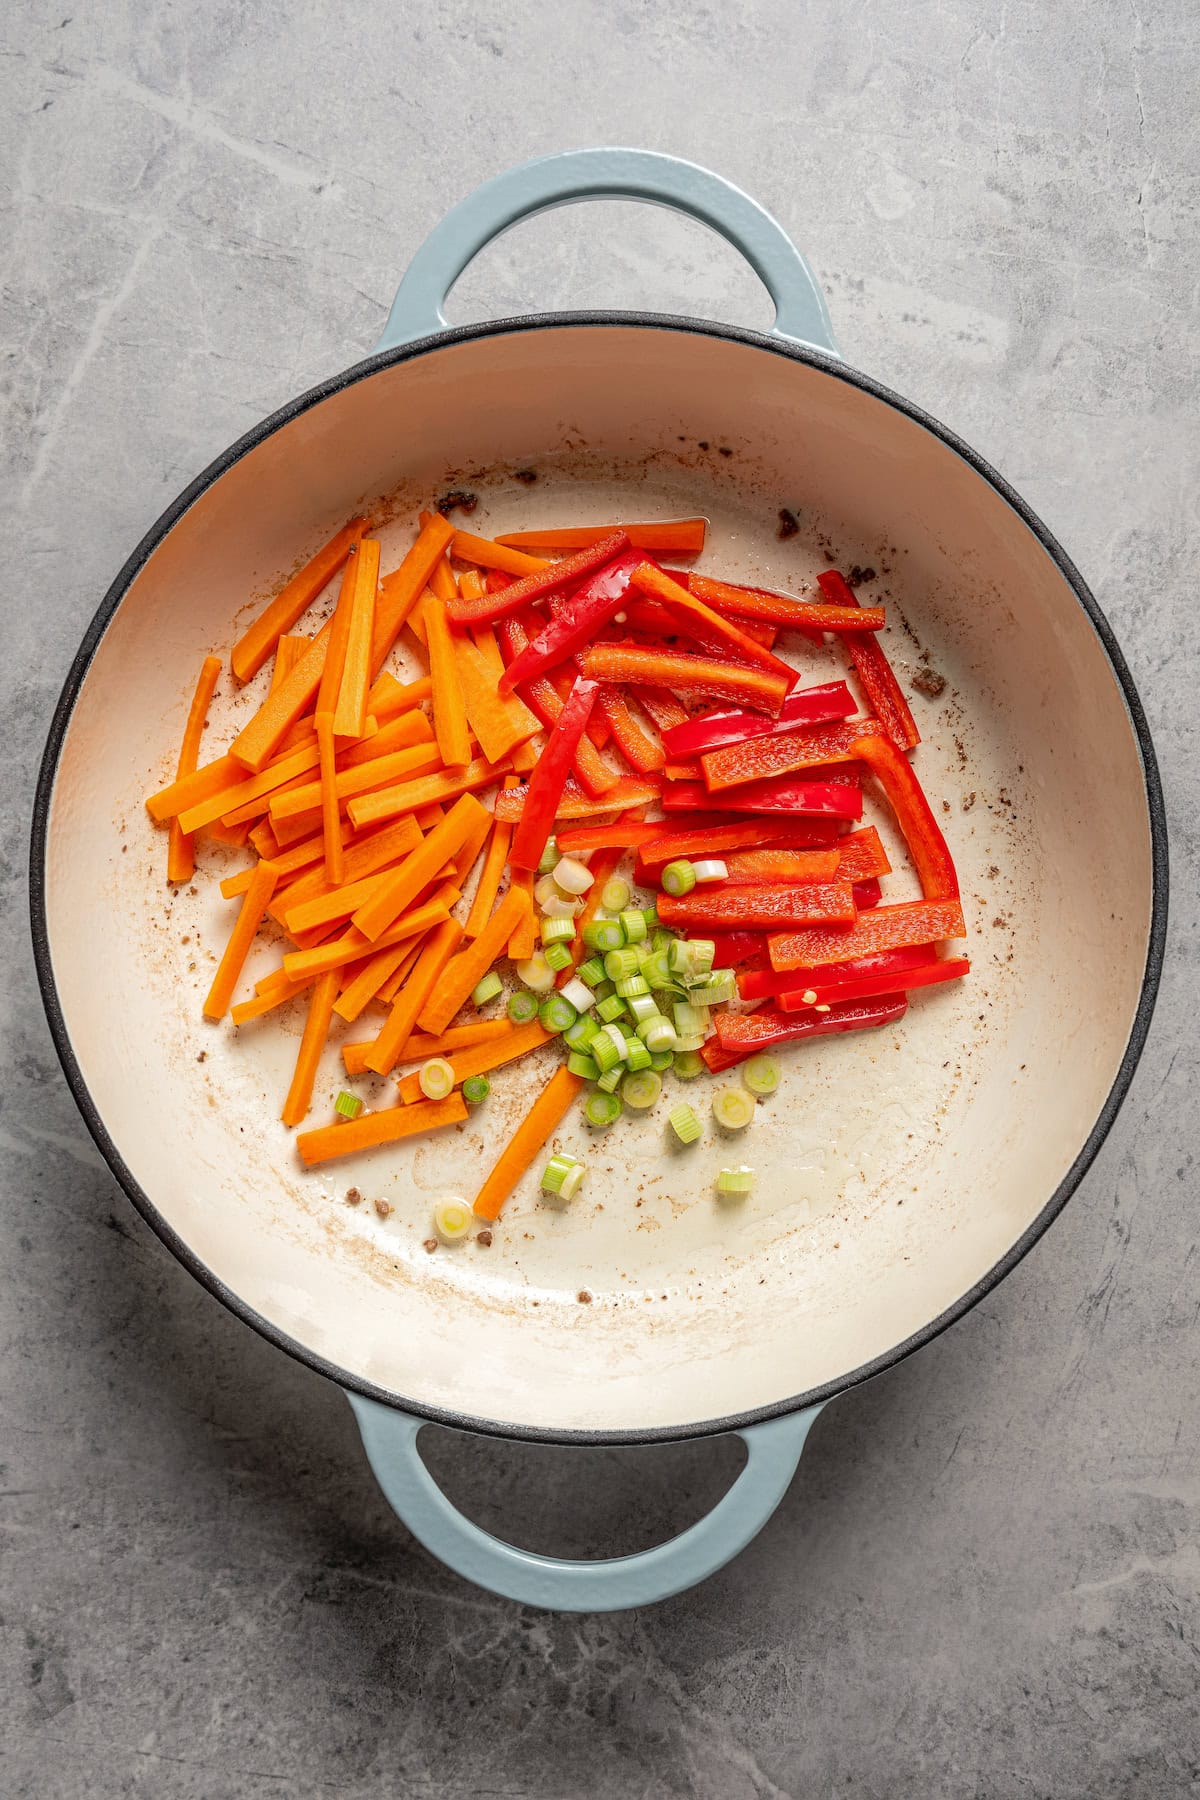 Julienne carrots and red bell peppers added to a skillet with scallions.